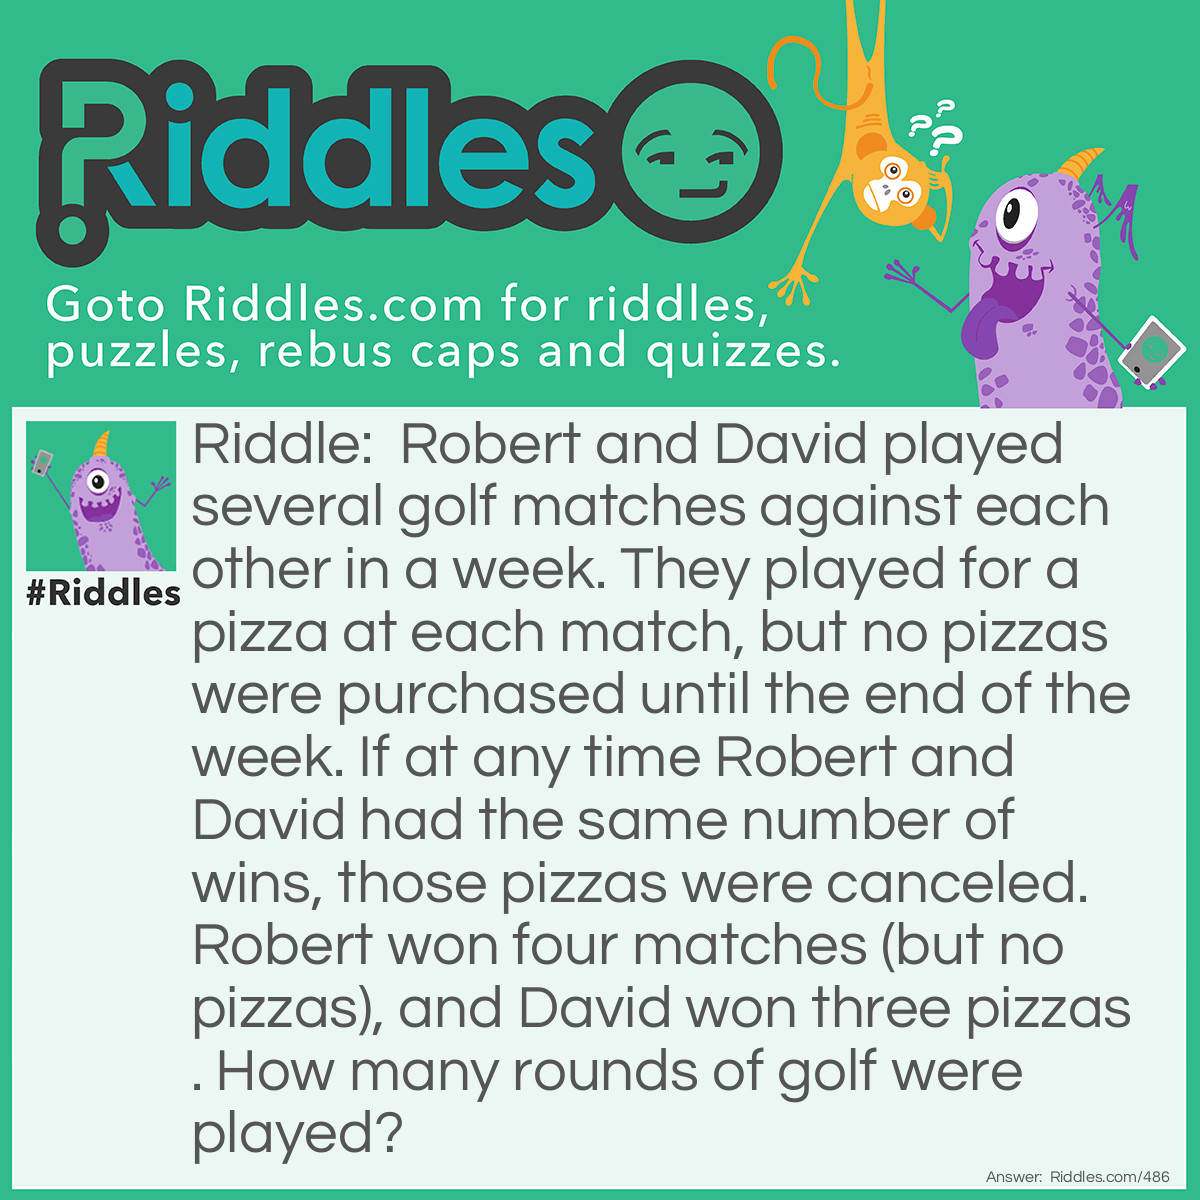 Riddle: Robert and David played several golf matches against each other in a week. They played for a pizza at each match, but no pizzas were purchased until the end of the week. If at any time Robert and David had the same number of wins, those pizzas were canceled. Robert won four matches (but no pizzas), and David won three pizzas. How many rounds of golf were played? Answer: Eleven, David won 7 matches, 4 to cancel out Robert's 4 wins, and 3 more to win the pizzas.